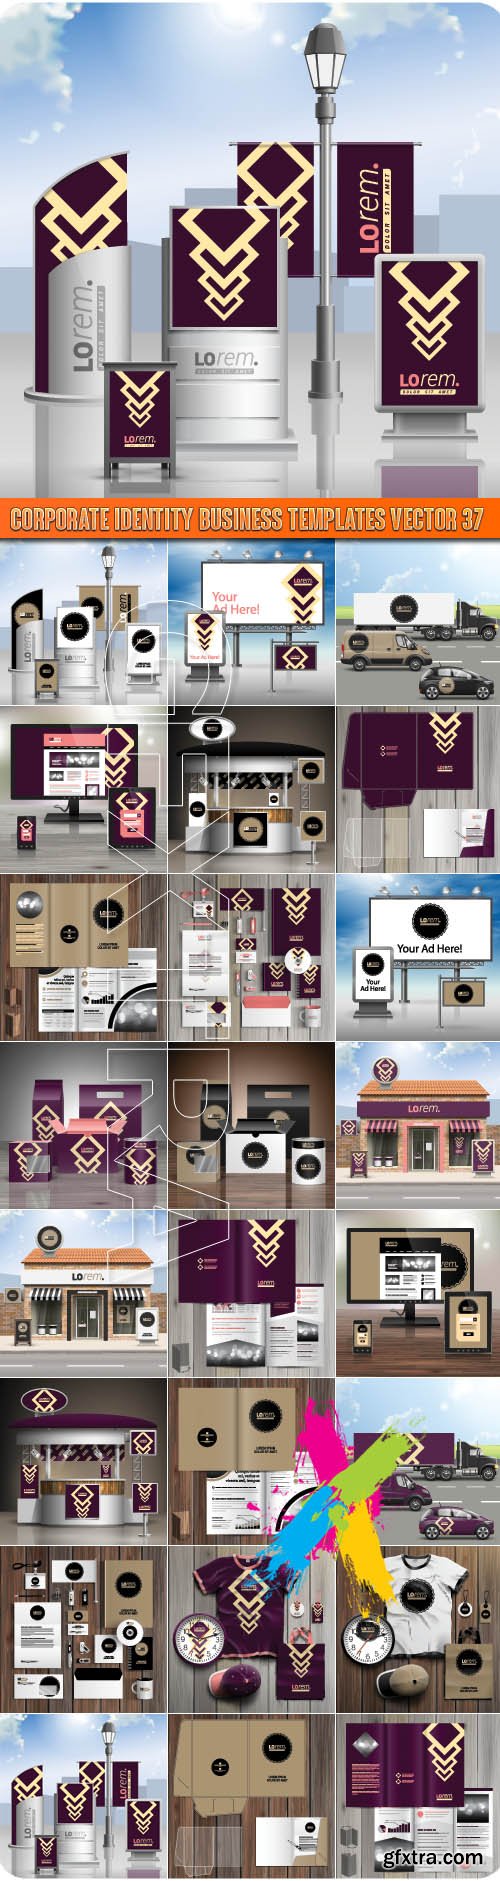 Corporate identity business templates vector 37